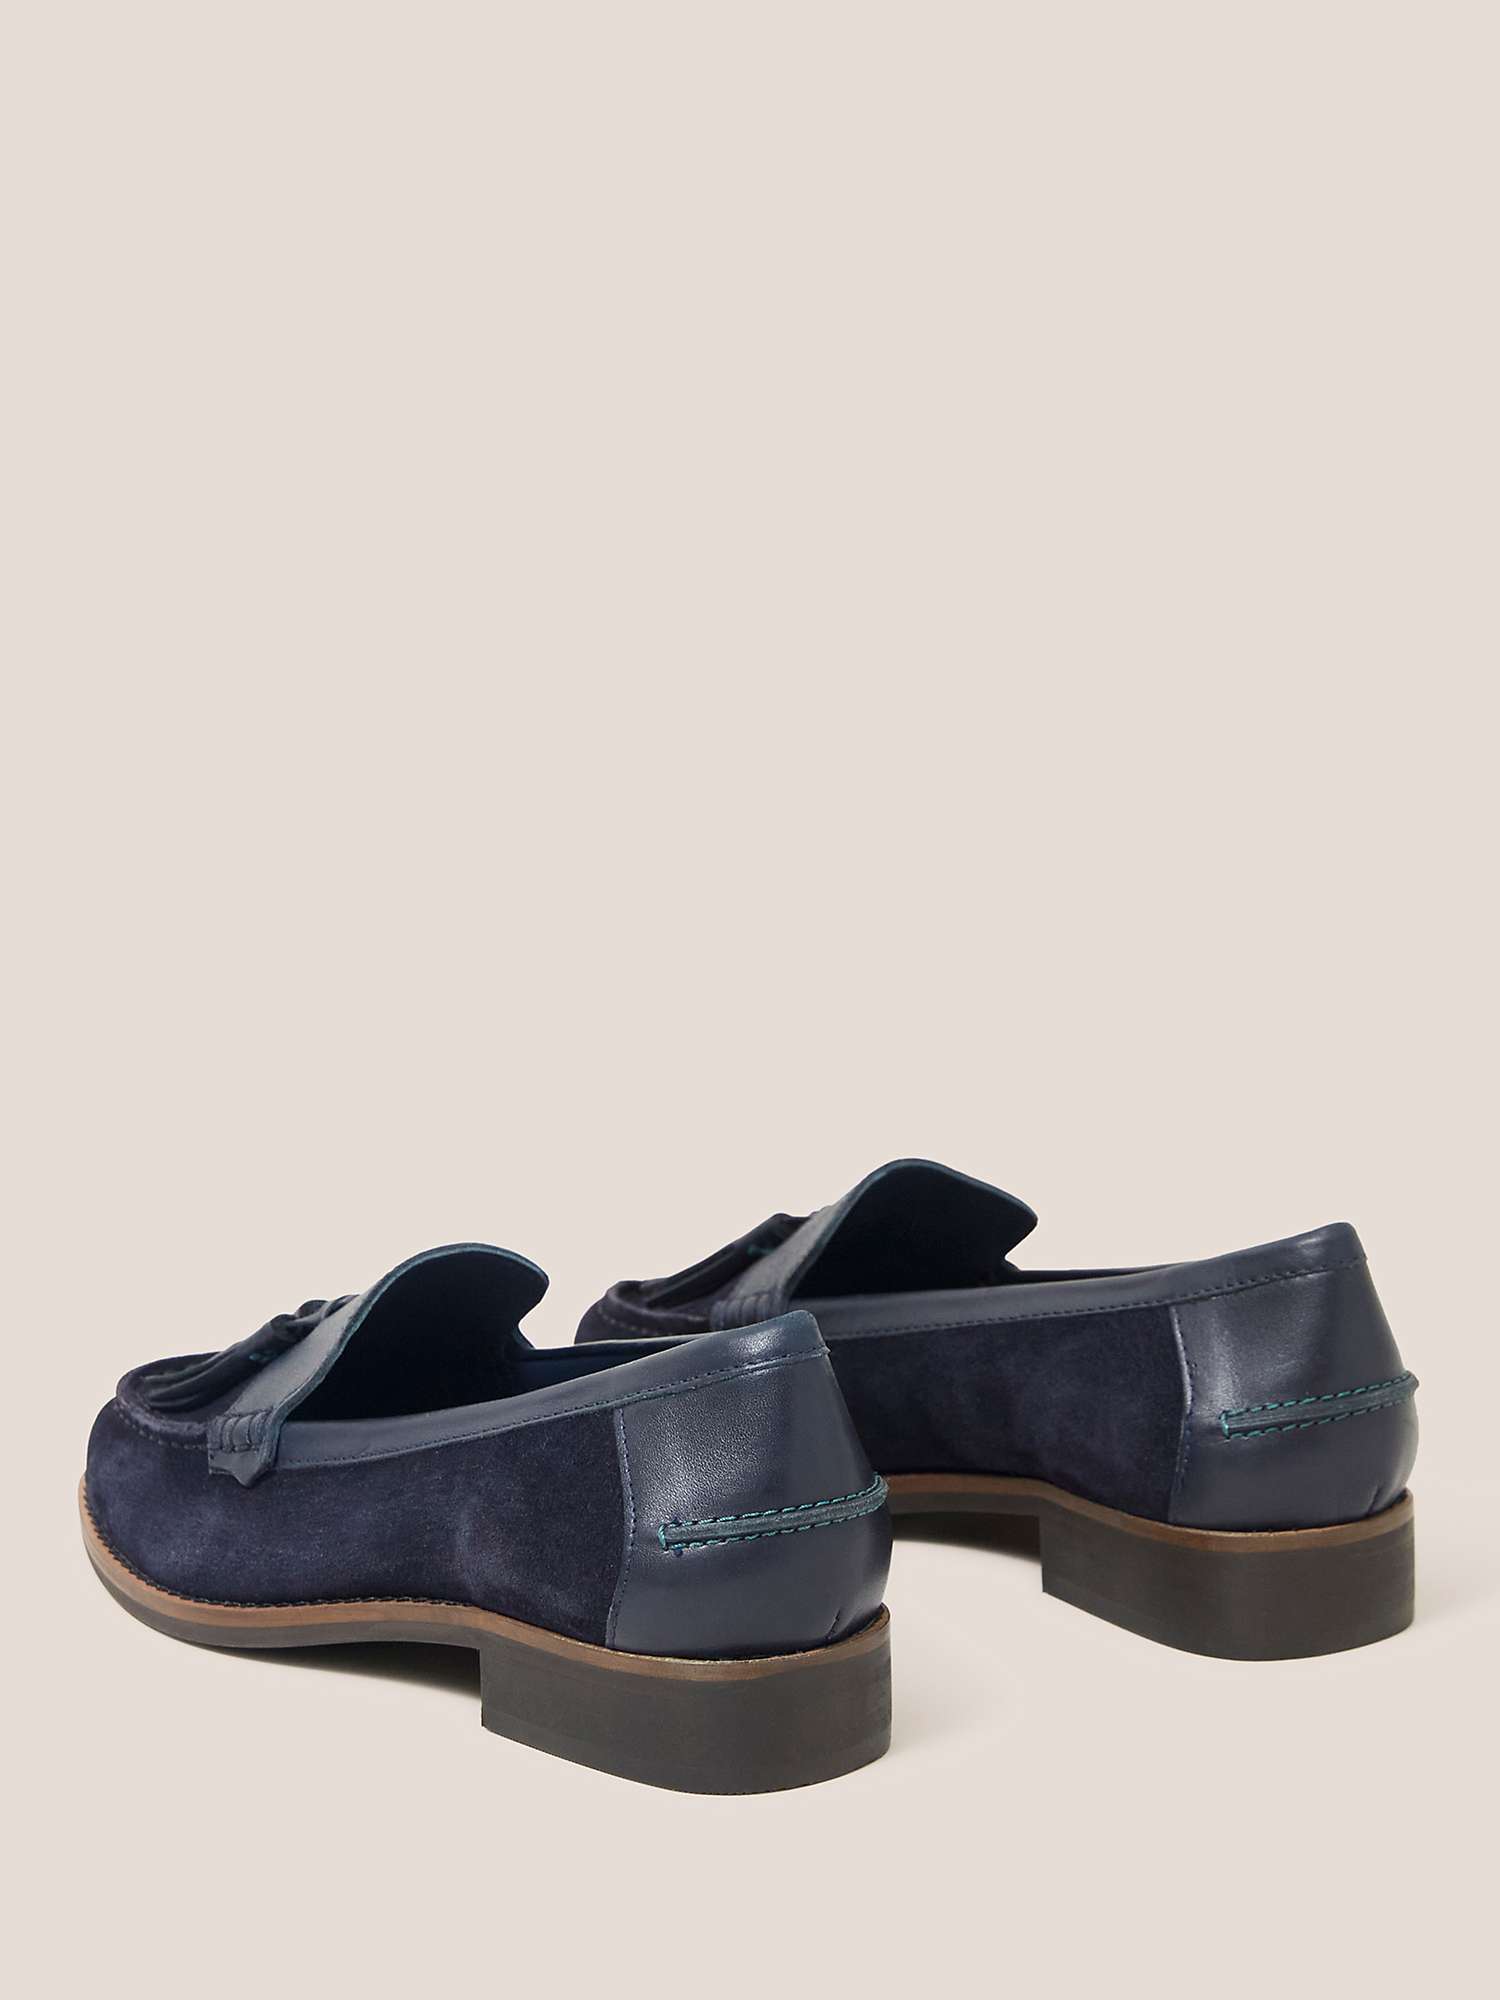 Buy White Stuff Elba Leather And Suede Loafers, Dark navy Online at johnlewis.com